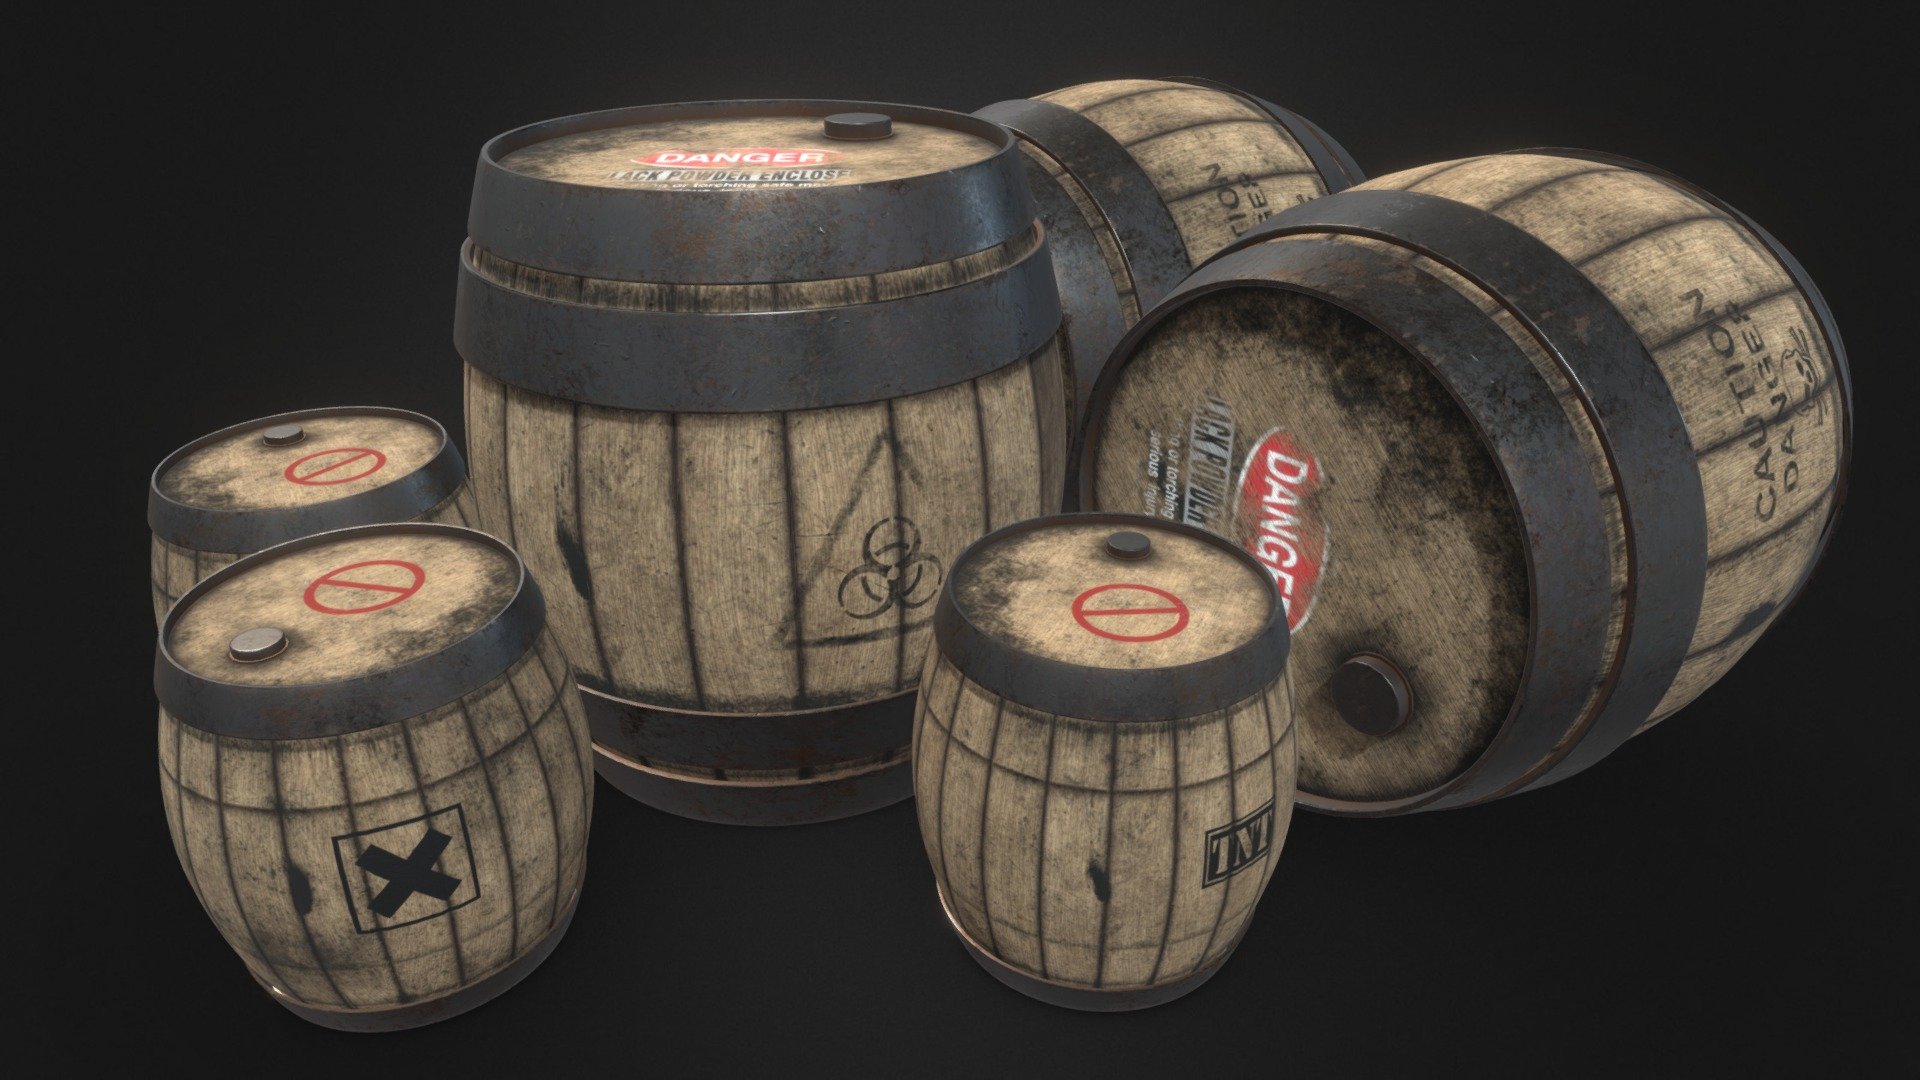 Hi guys,
These Barrels 5Types Lowpoly - Game Ready,Vfx asset.
Photorealistic - 4k textures.
Quads- .Obj(compatable with any software)
Download,Like and comment.

Check my page for more models- https://sketchfab.com/leaguestudio

Hire me - gunasekharpaidi@gmail.com

Thank u
Stay Safe 3d model